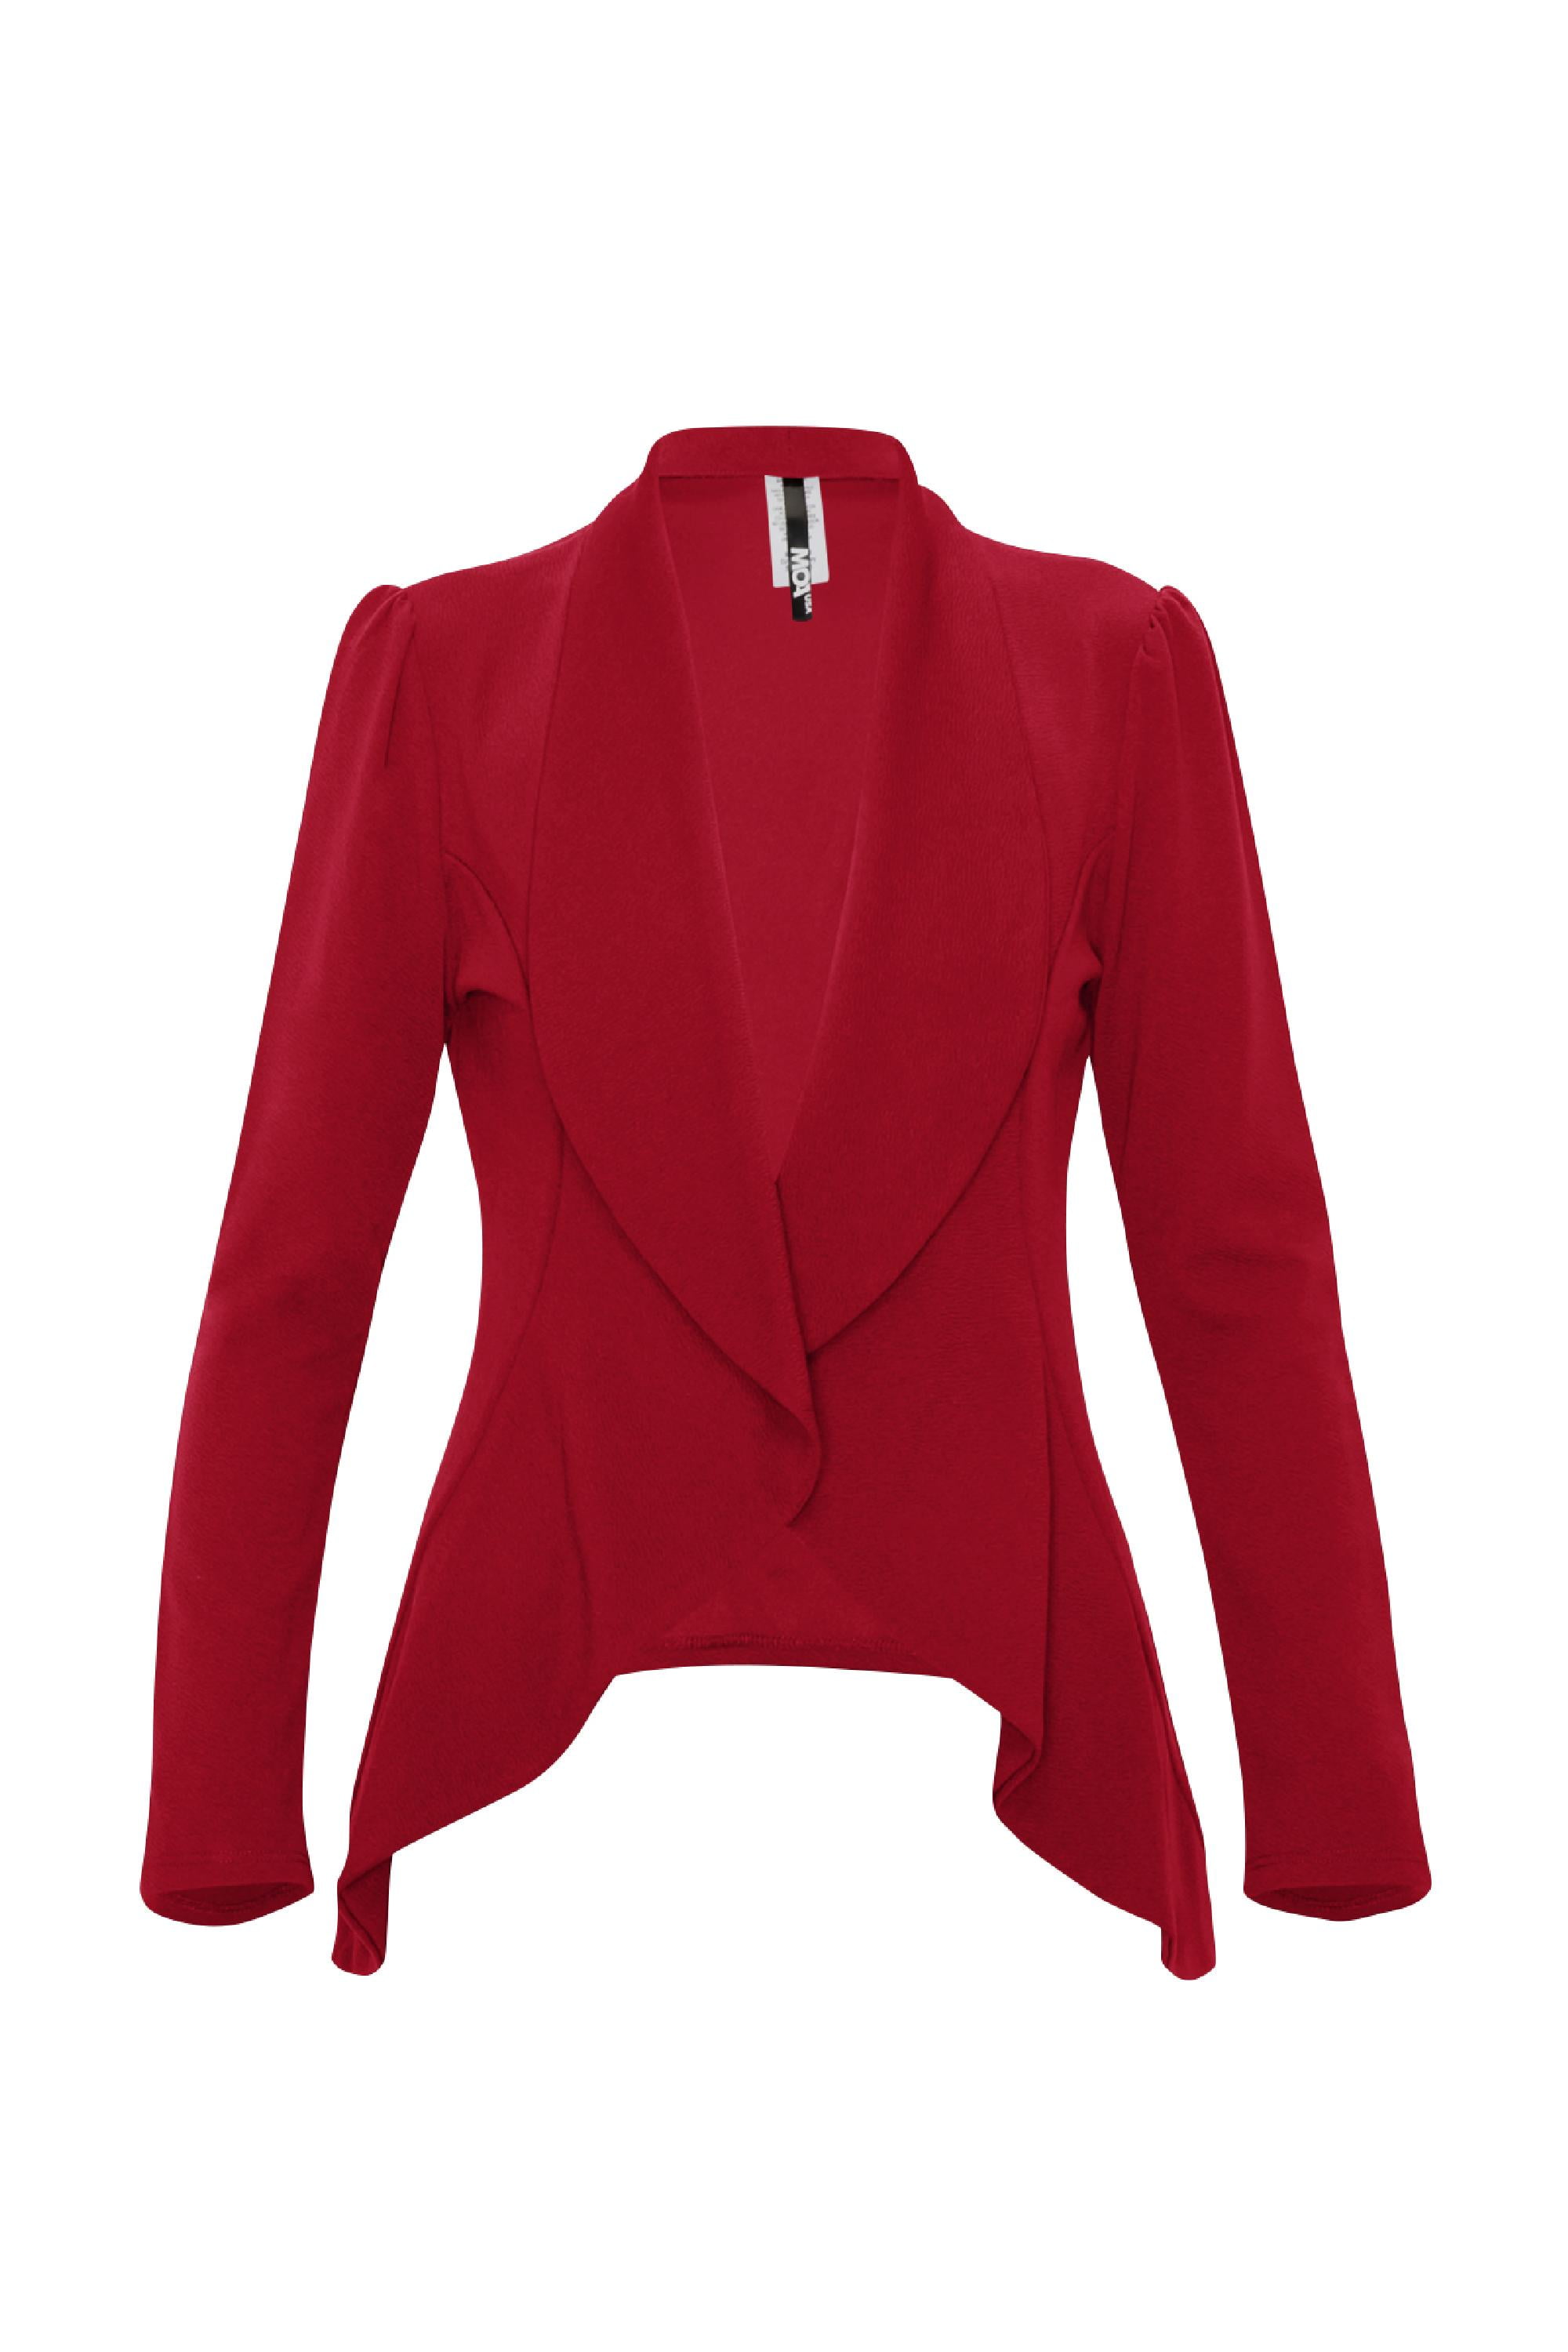 Women's Casual Long Sleeve Solid Open Blazer Jacket Made in USA ...